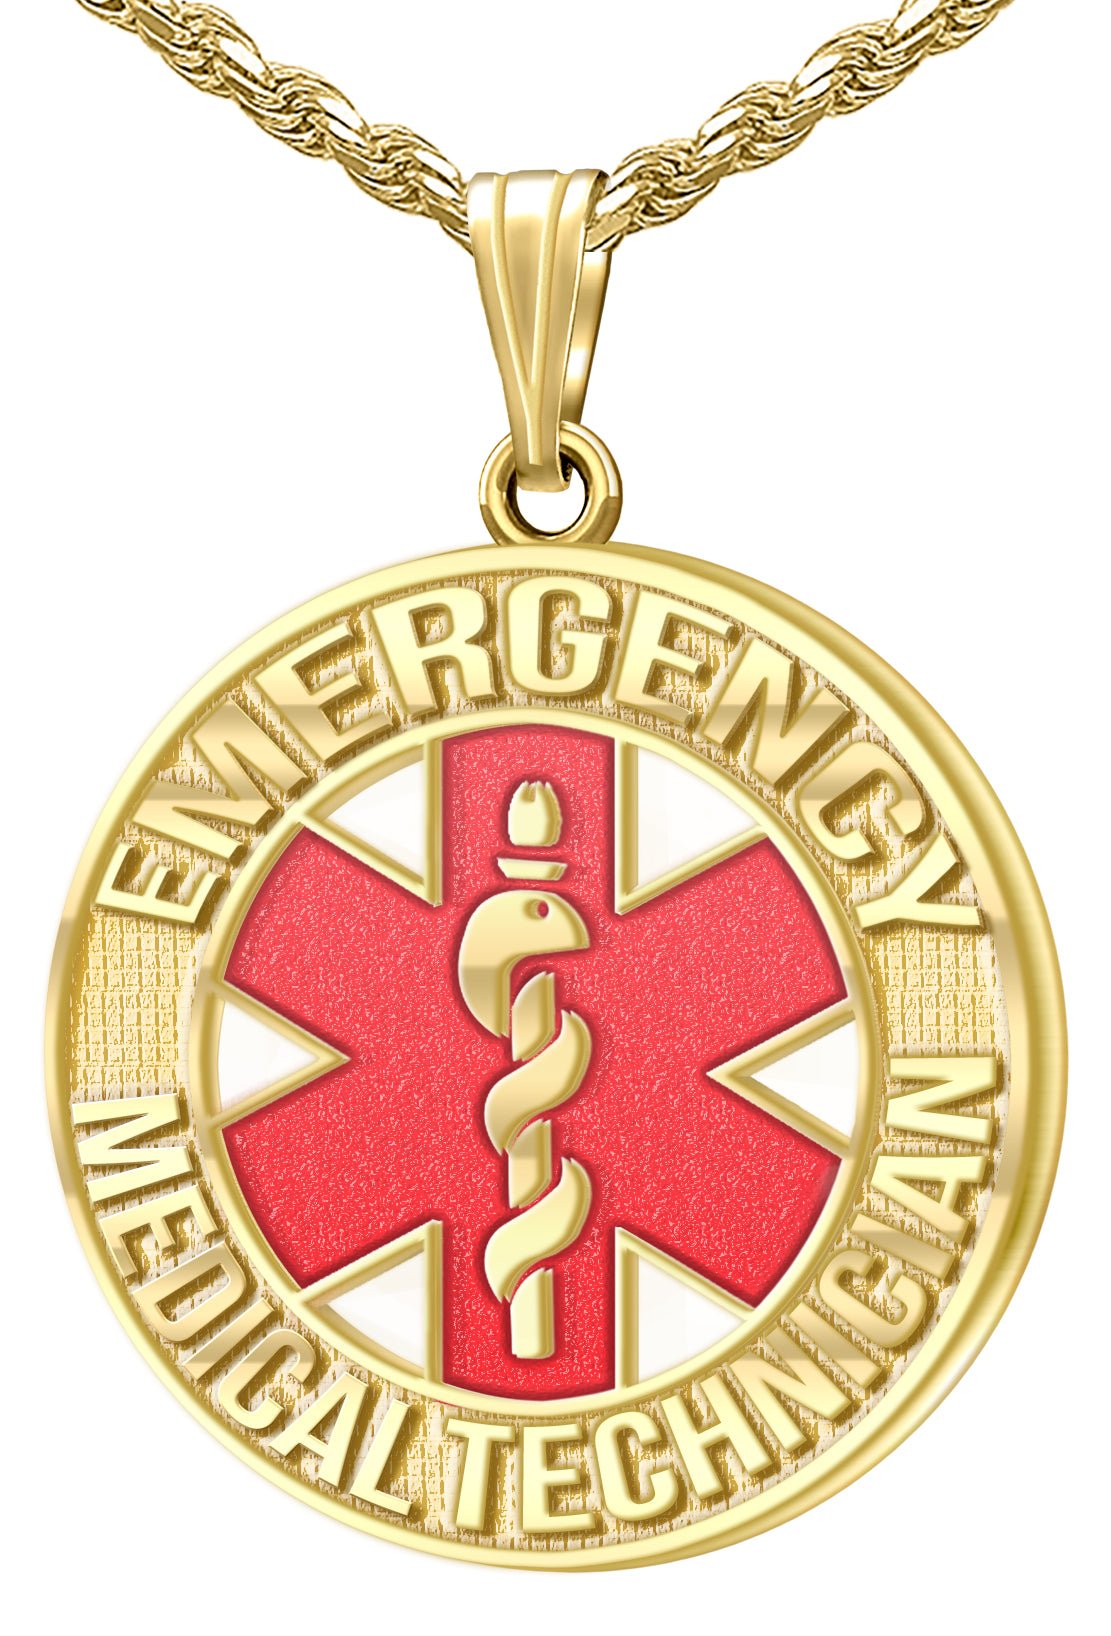 Wearing a Medical Alert Necklace Could Save Your Life | by Alexis Stone |  Medium